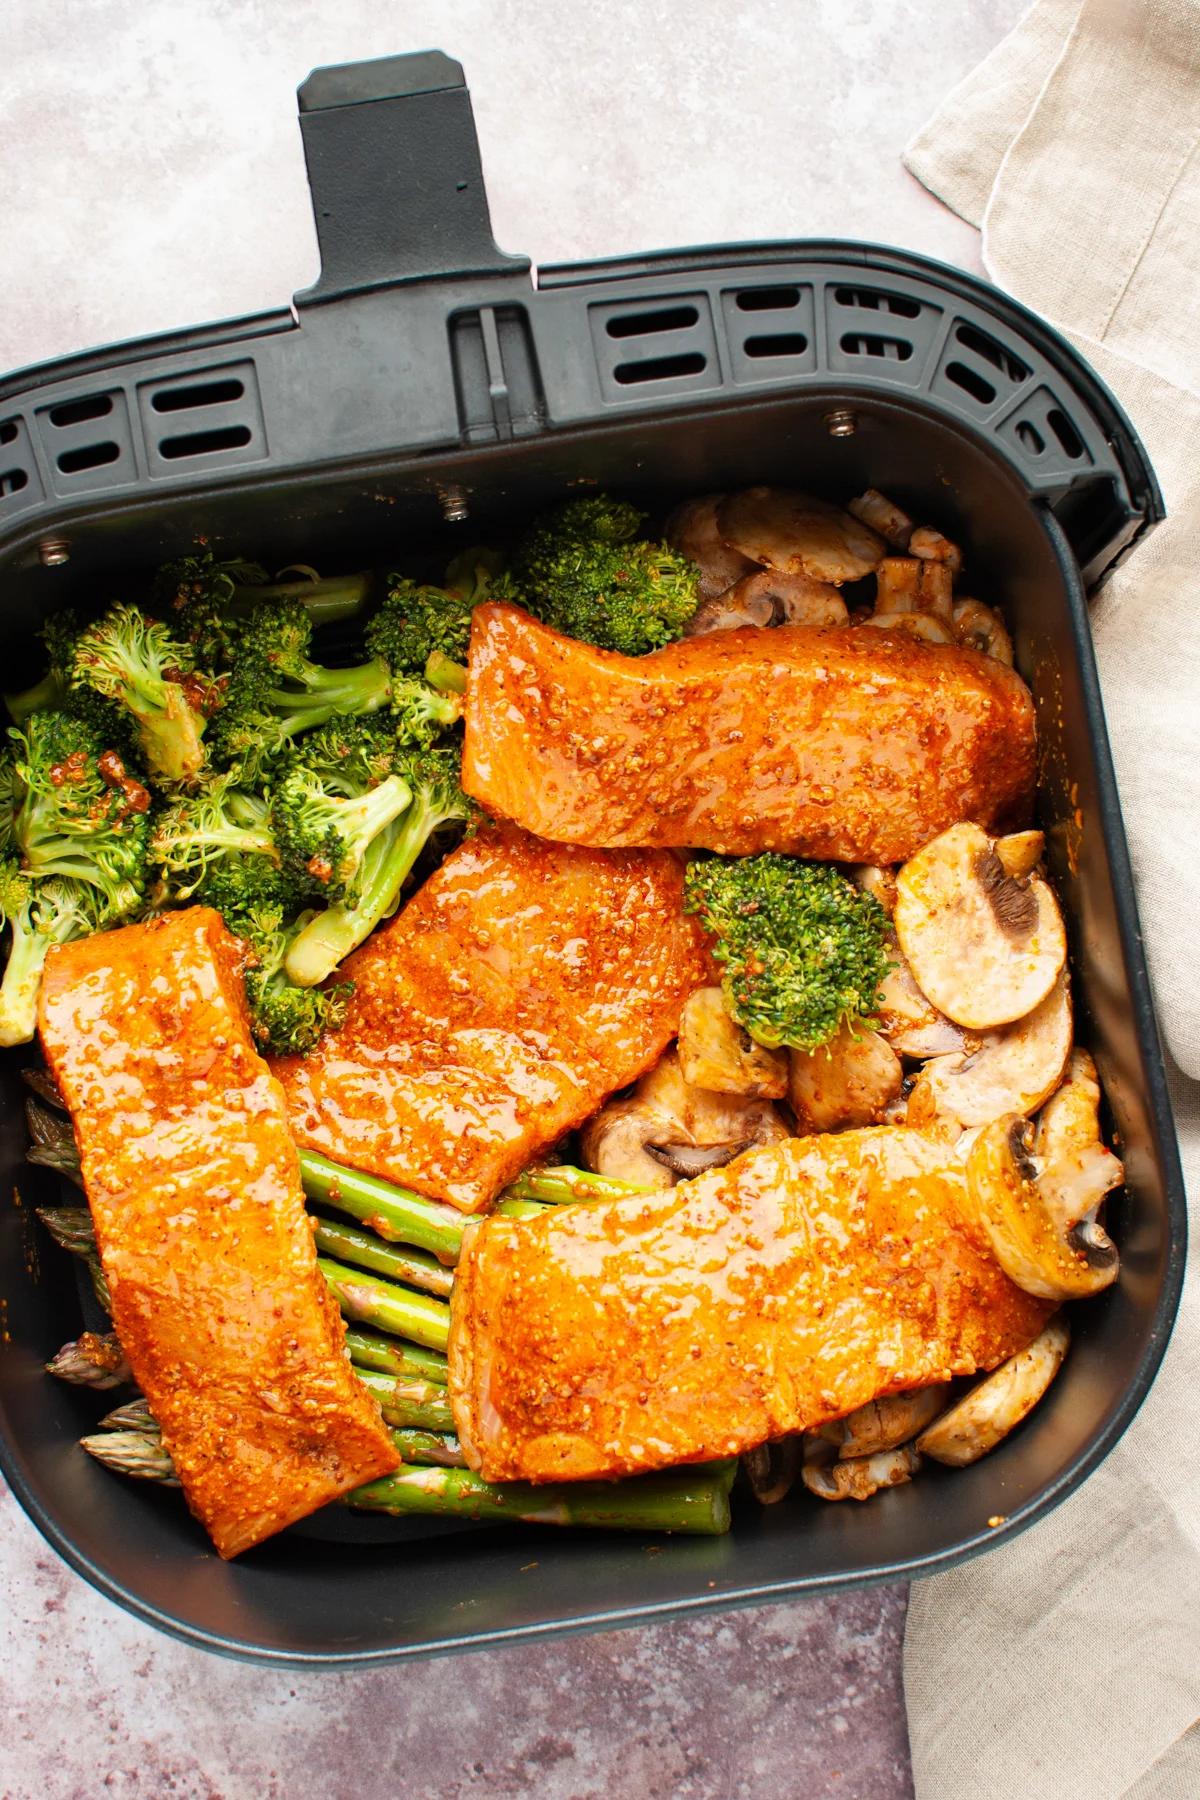 https://onecarefreecook.com/wp-content/uploads/2022/05/air-fryer-salmon-and-vegetables_3888.jpg.webp